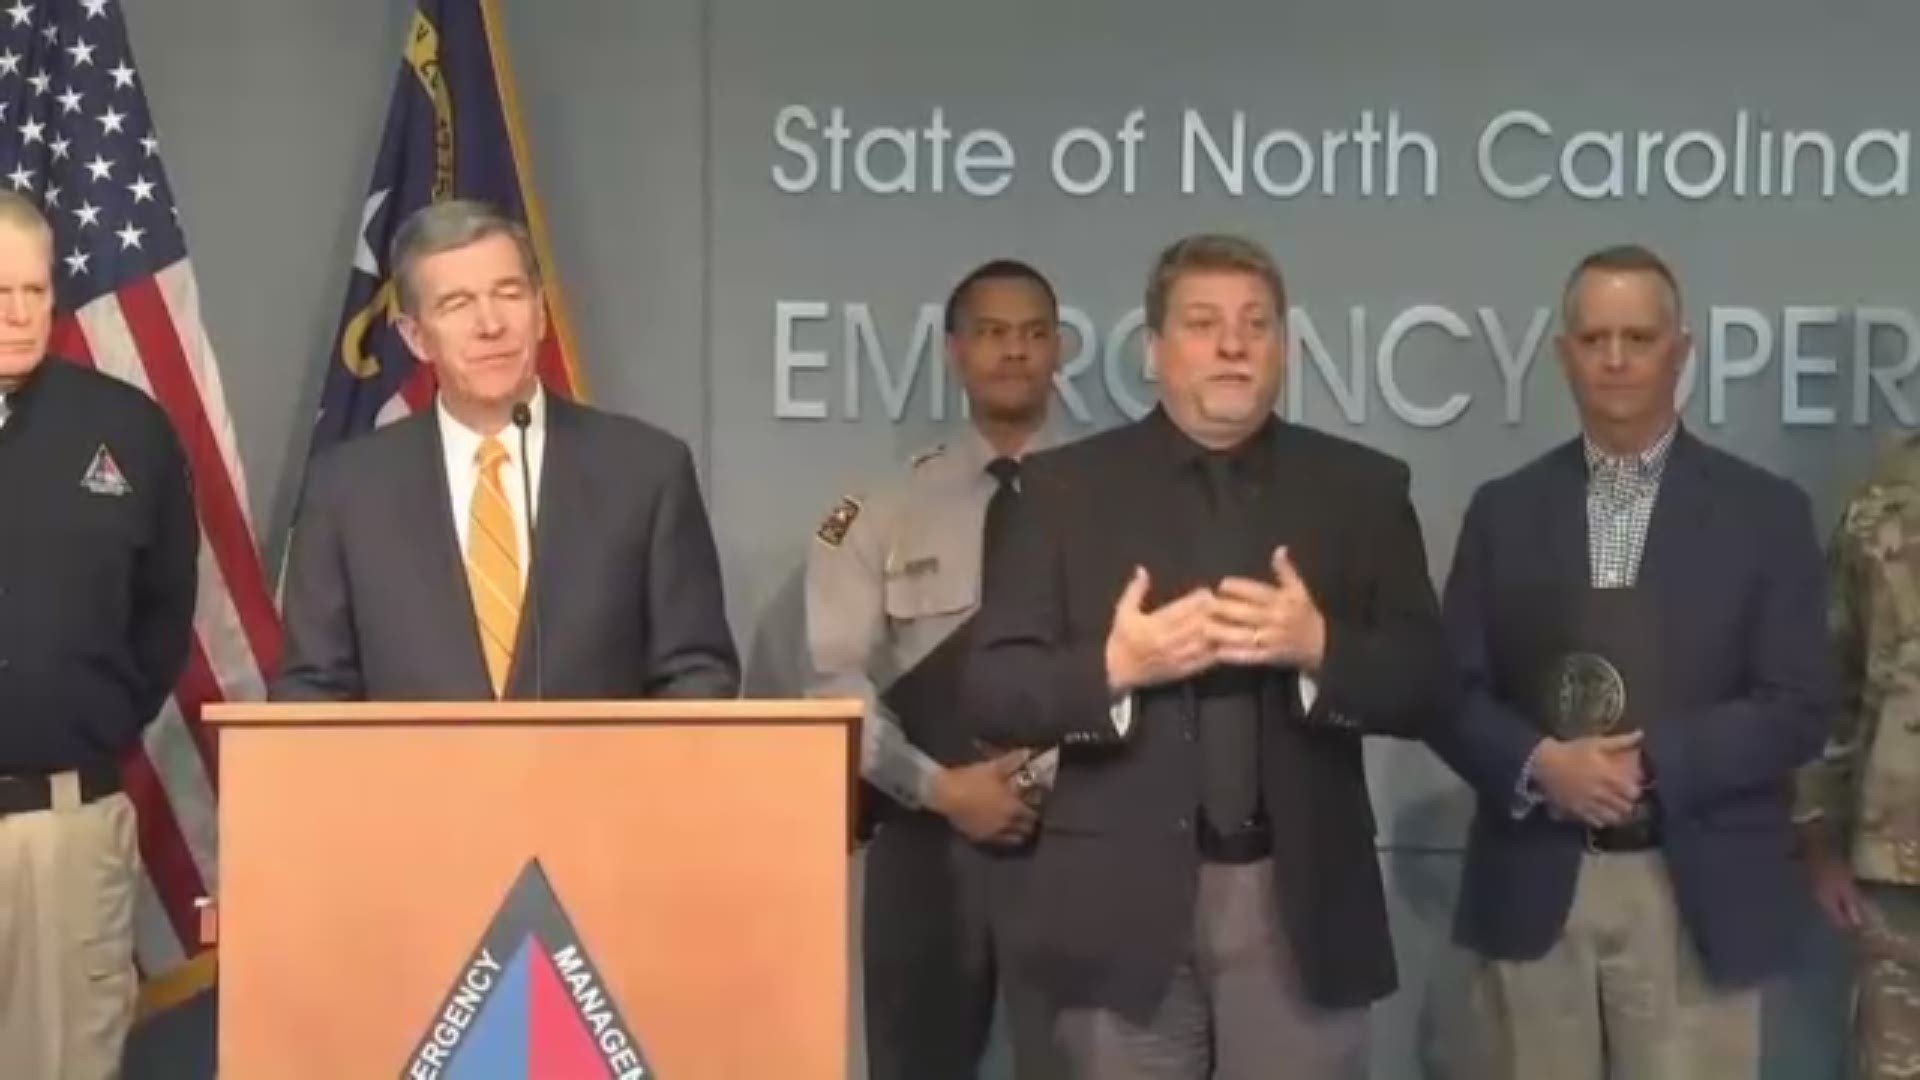 Governor Cooper urged North Carolinians to be prepared as winter weather moves through our state. Emergency crews will be stationed all over to help as needed.